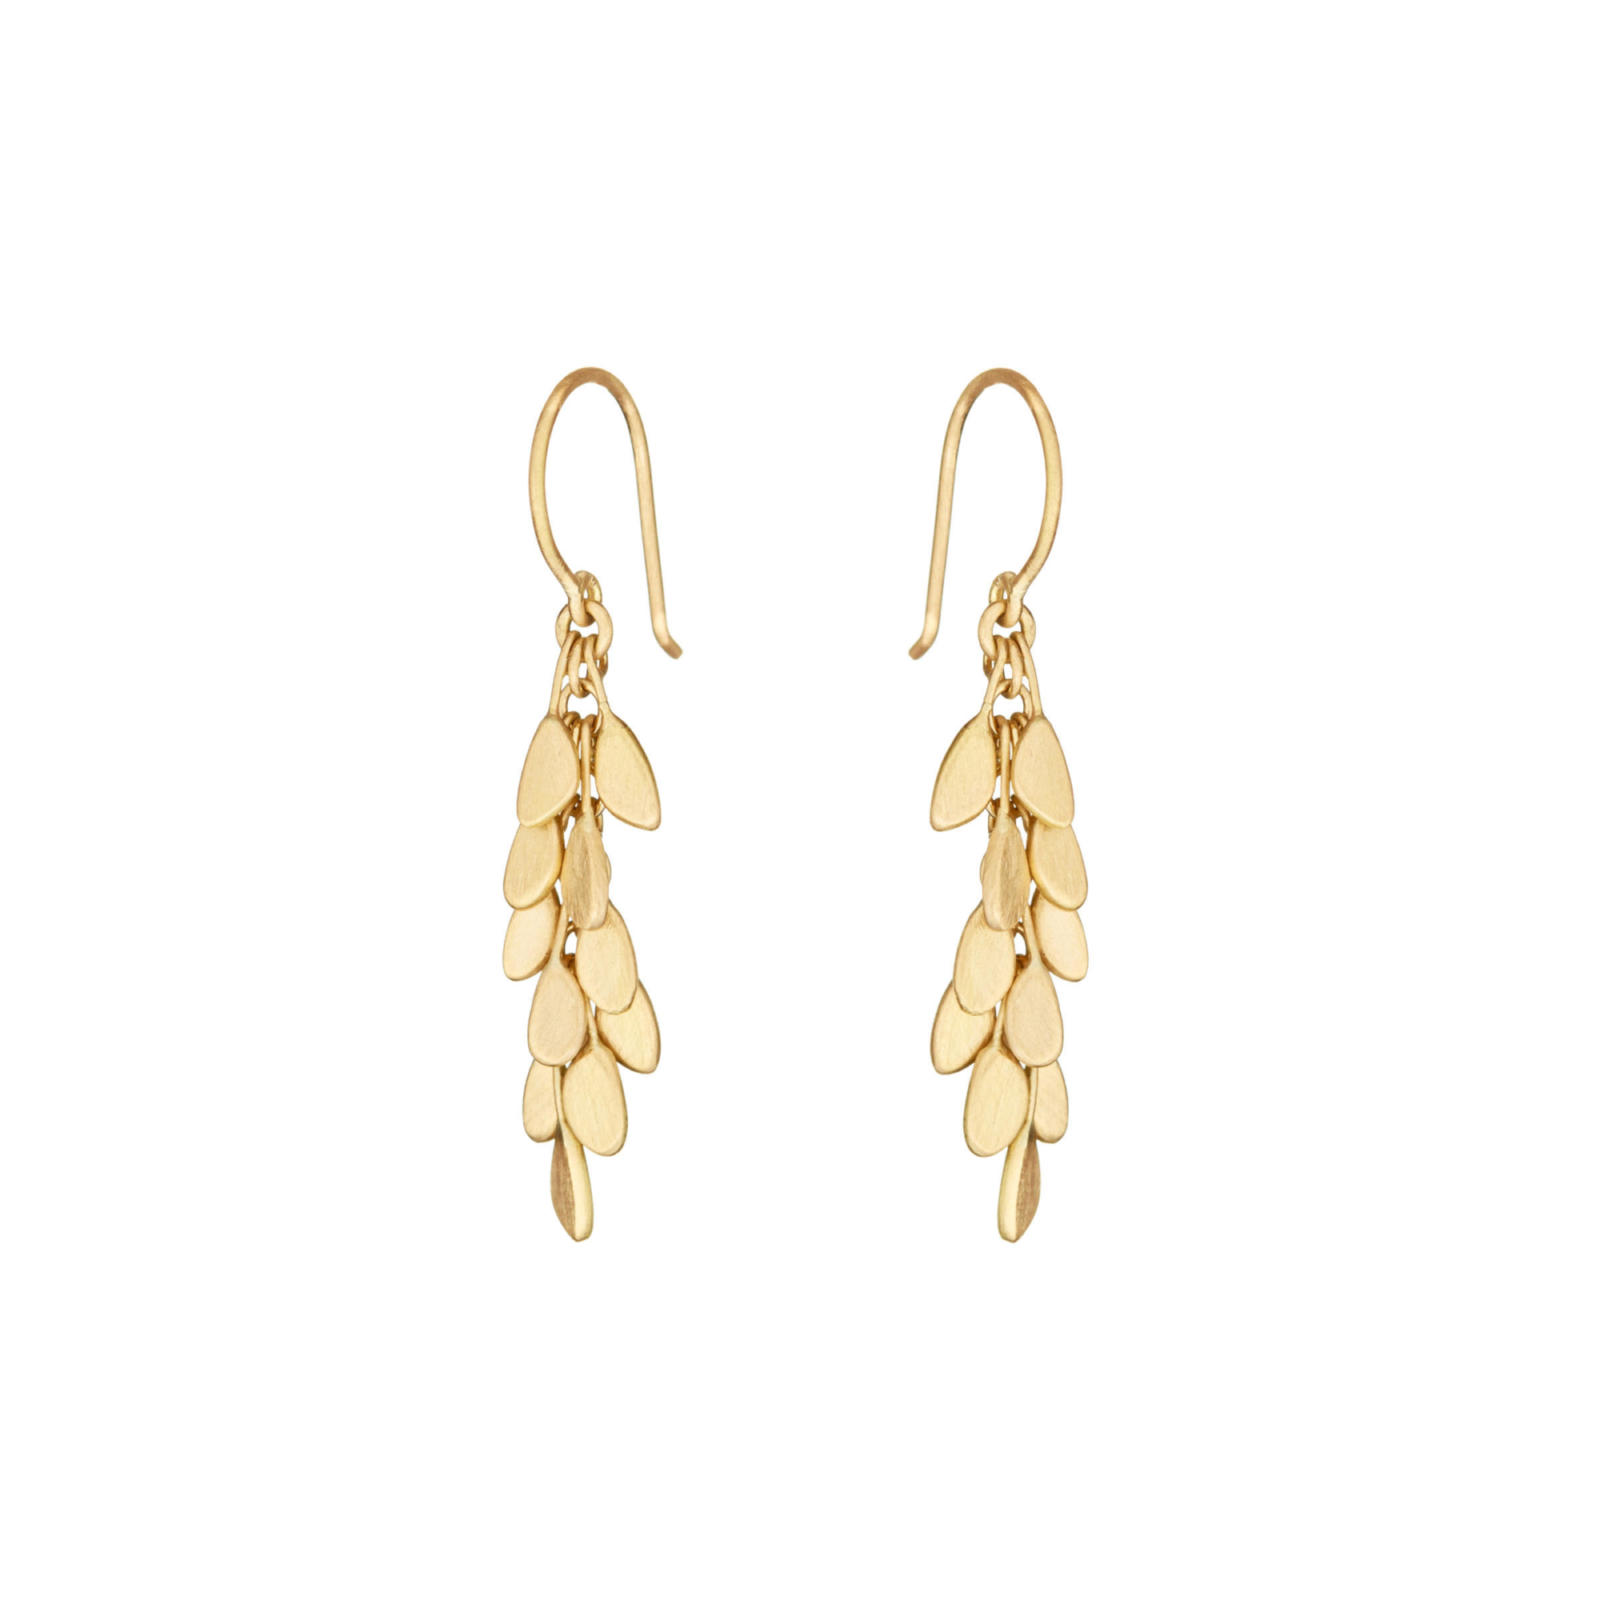 Sia Taylor ME10 Y Yellow Gold Earrings S